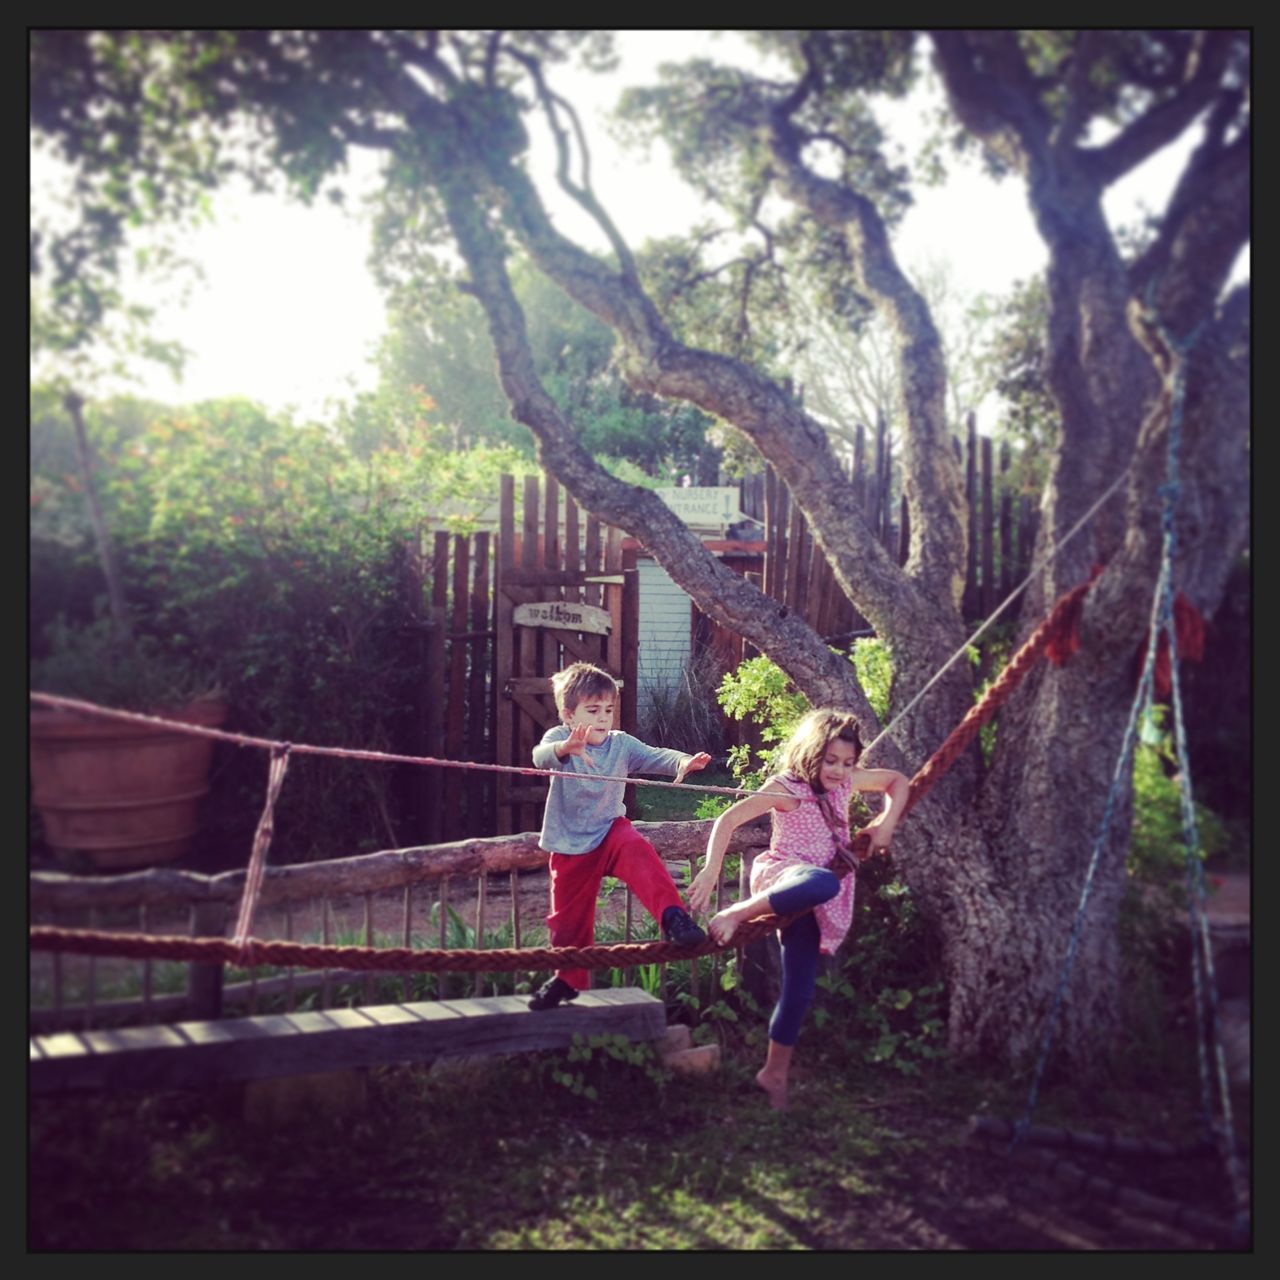 Rope bridge playground at an indigenous tree nursery that we found (close to Cape Point)...